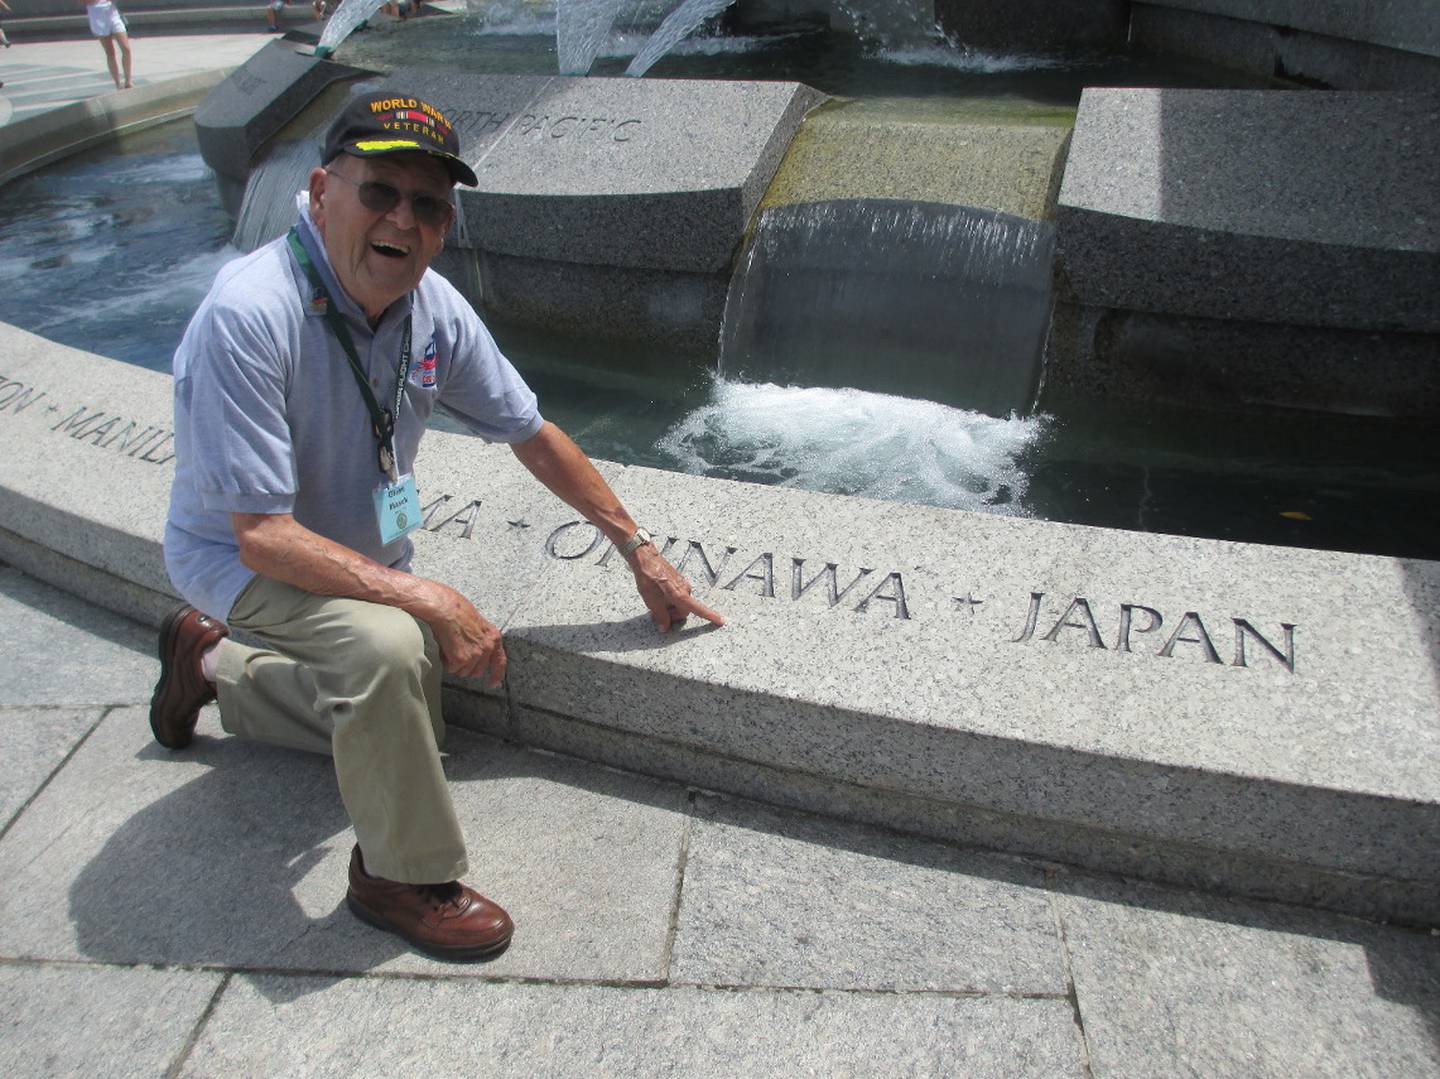 During his visit to Washington, D.C., Glenn Masek stopped at the World War II memorial noting the invasion of Okinawa, which he participated in more than 70 years earlier.